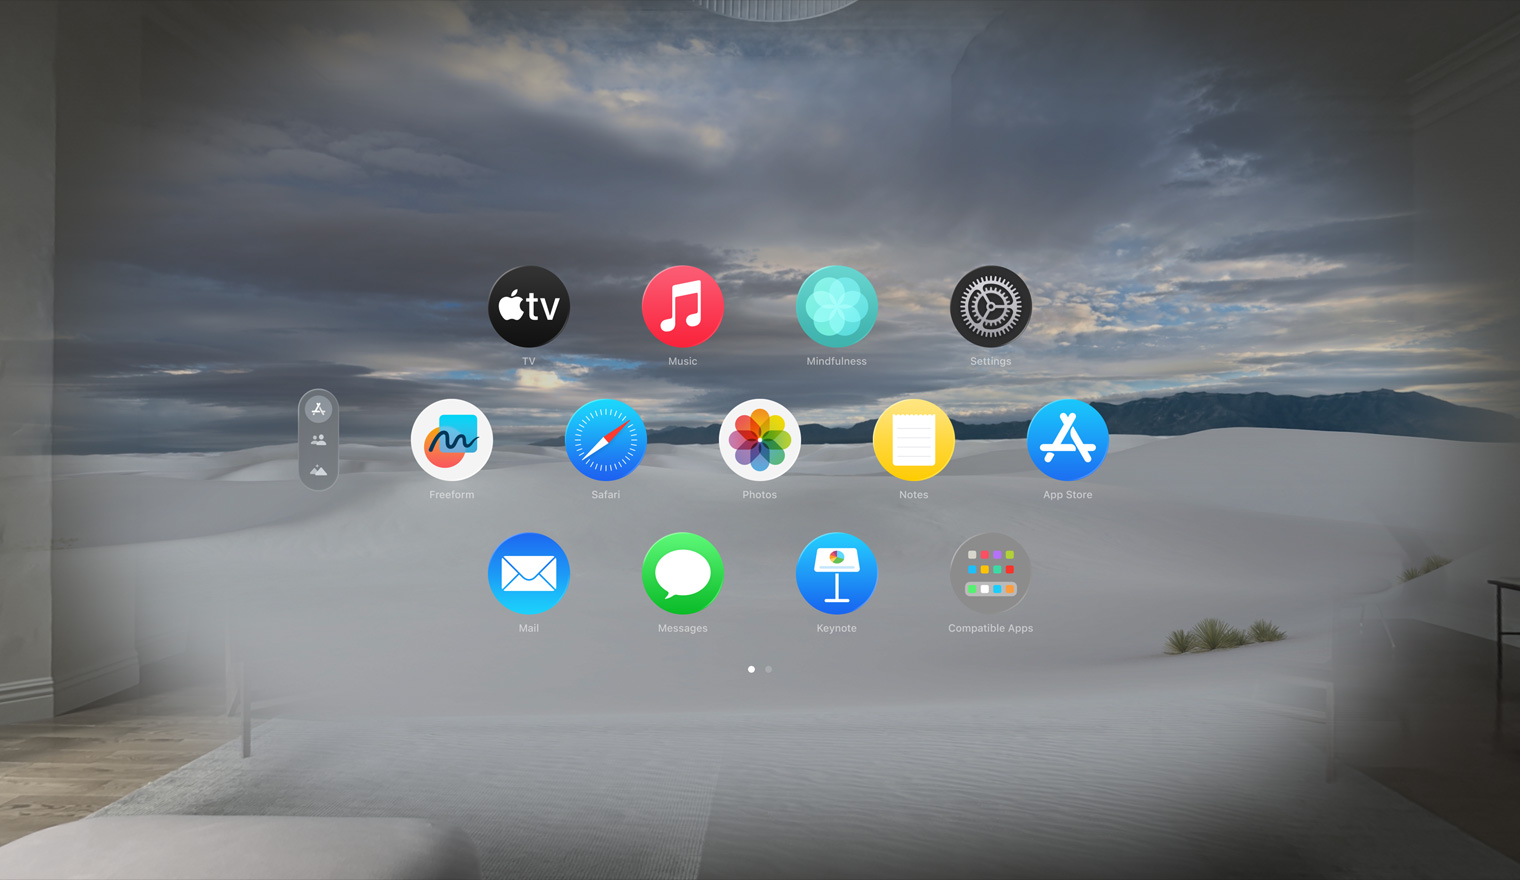 The Home Screen in the White Sands Environment